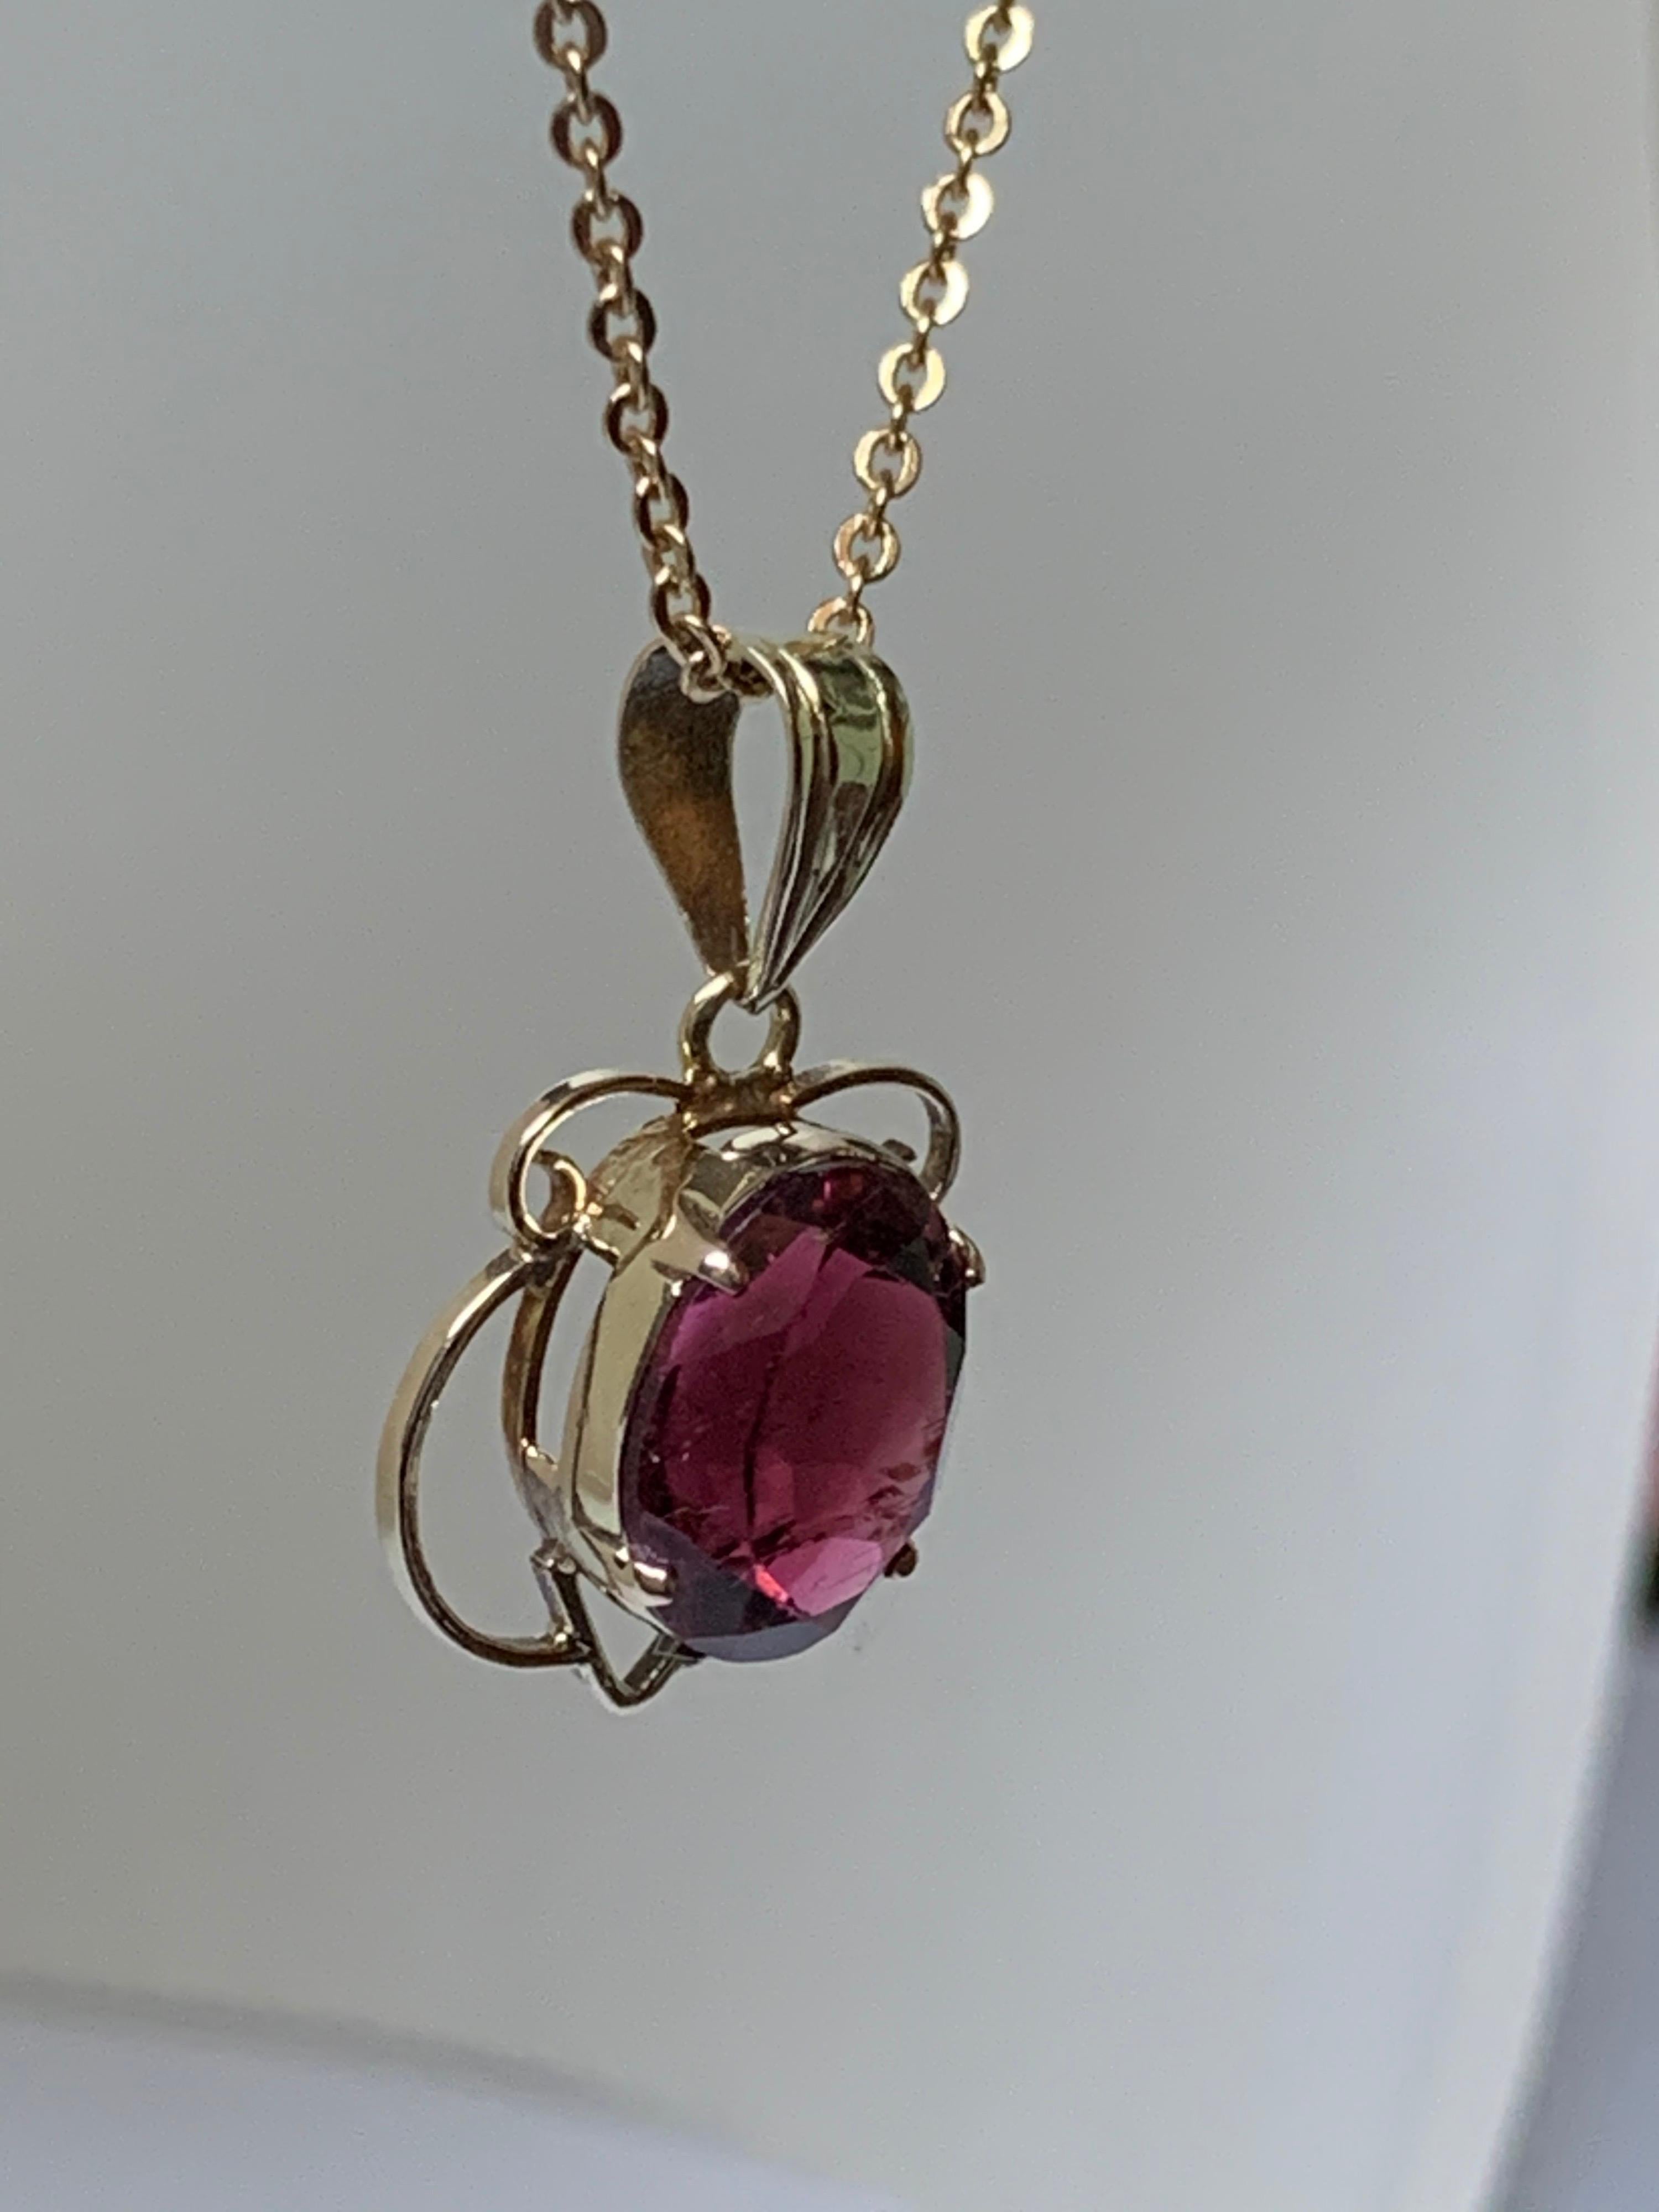 Natural Brownish Pink Tourmaline is 100% Natural stone from mother earth. The stone is hand cut and polished. the stone is set in 14 Karat Yellow Gold ,The size of the stone is 8 mm X 10 mm.

Note: Chain is not included in this pendant.